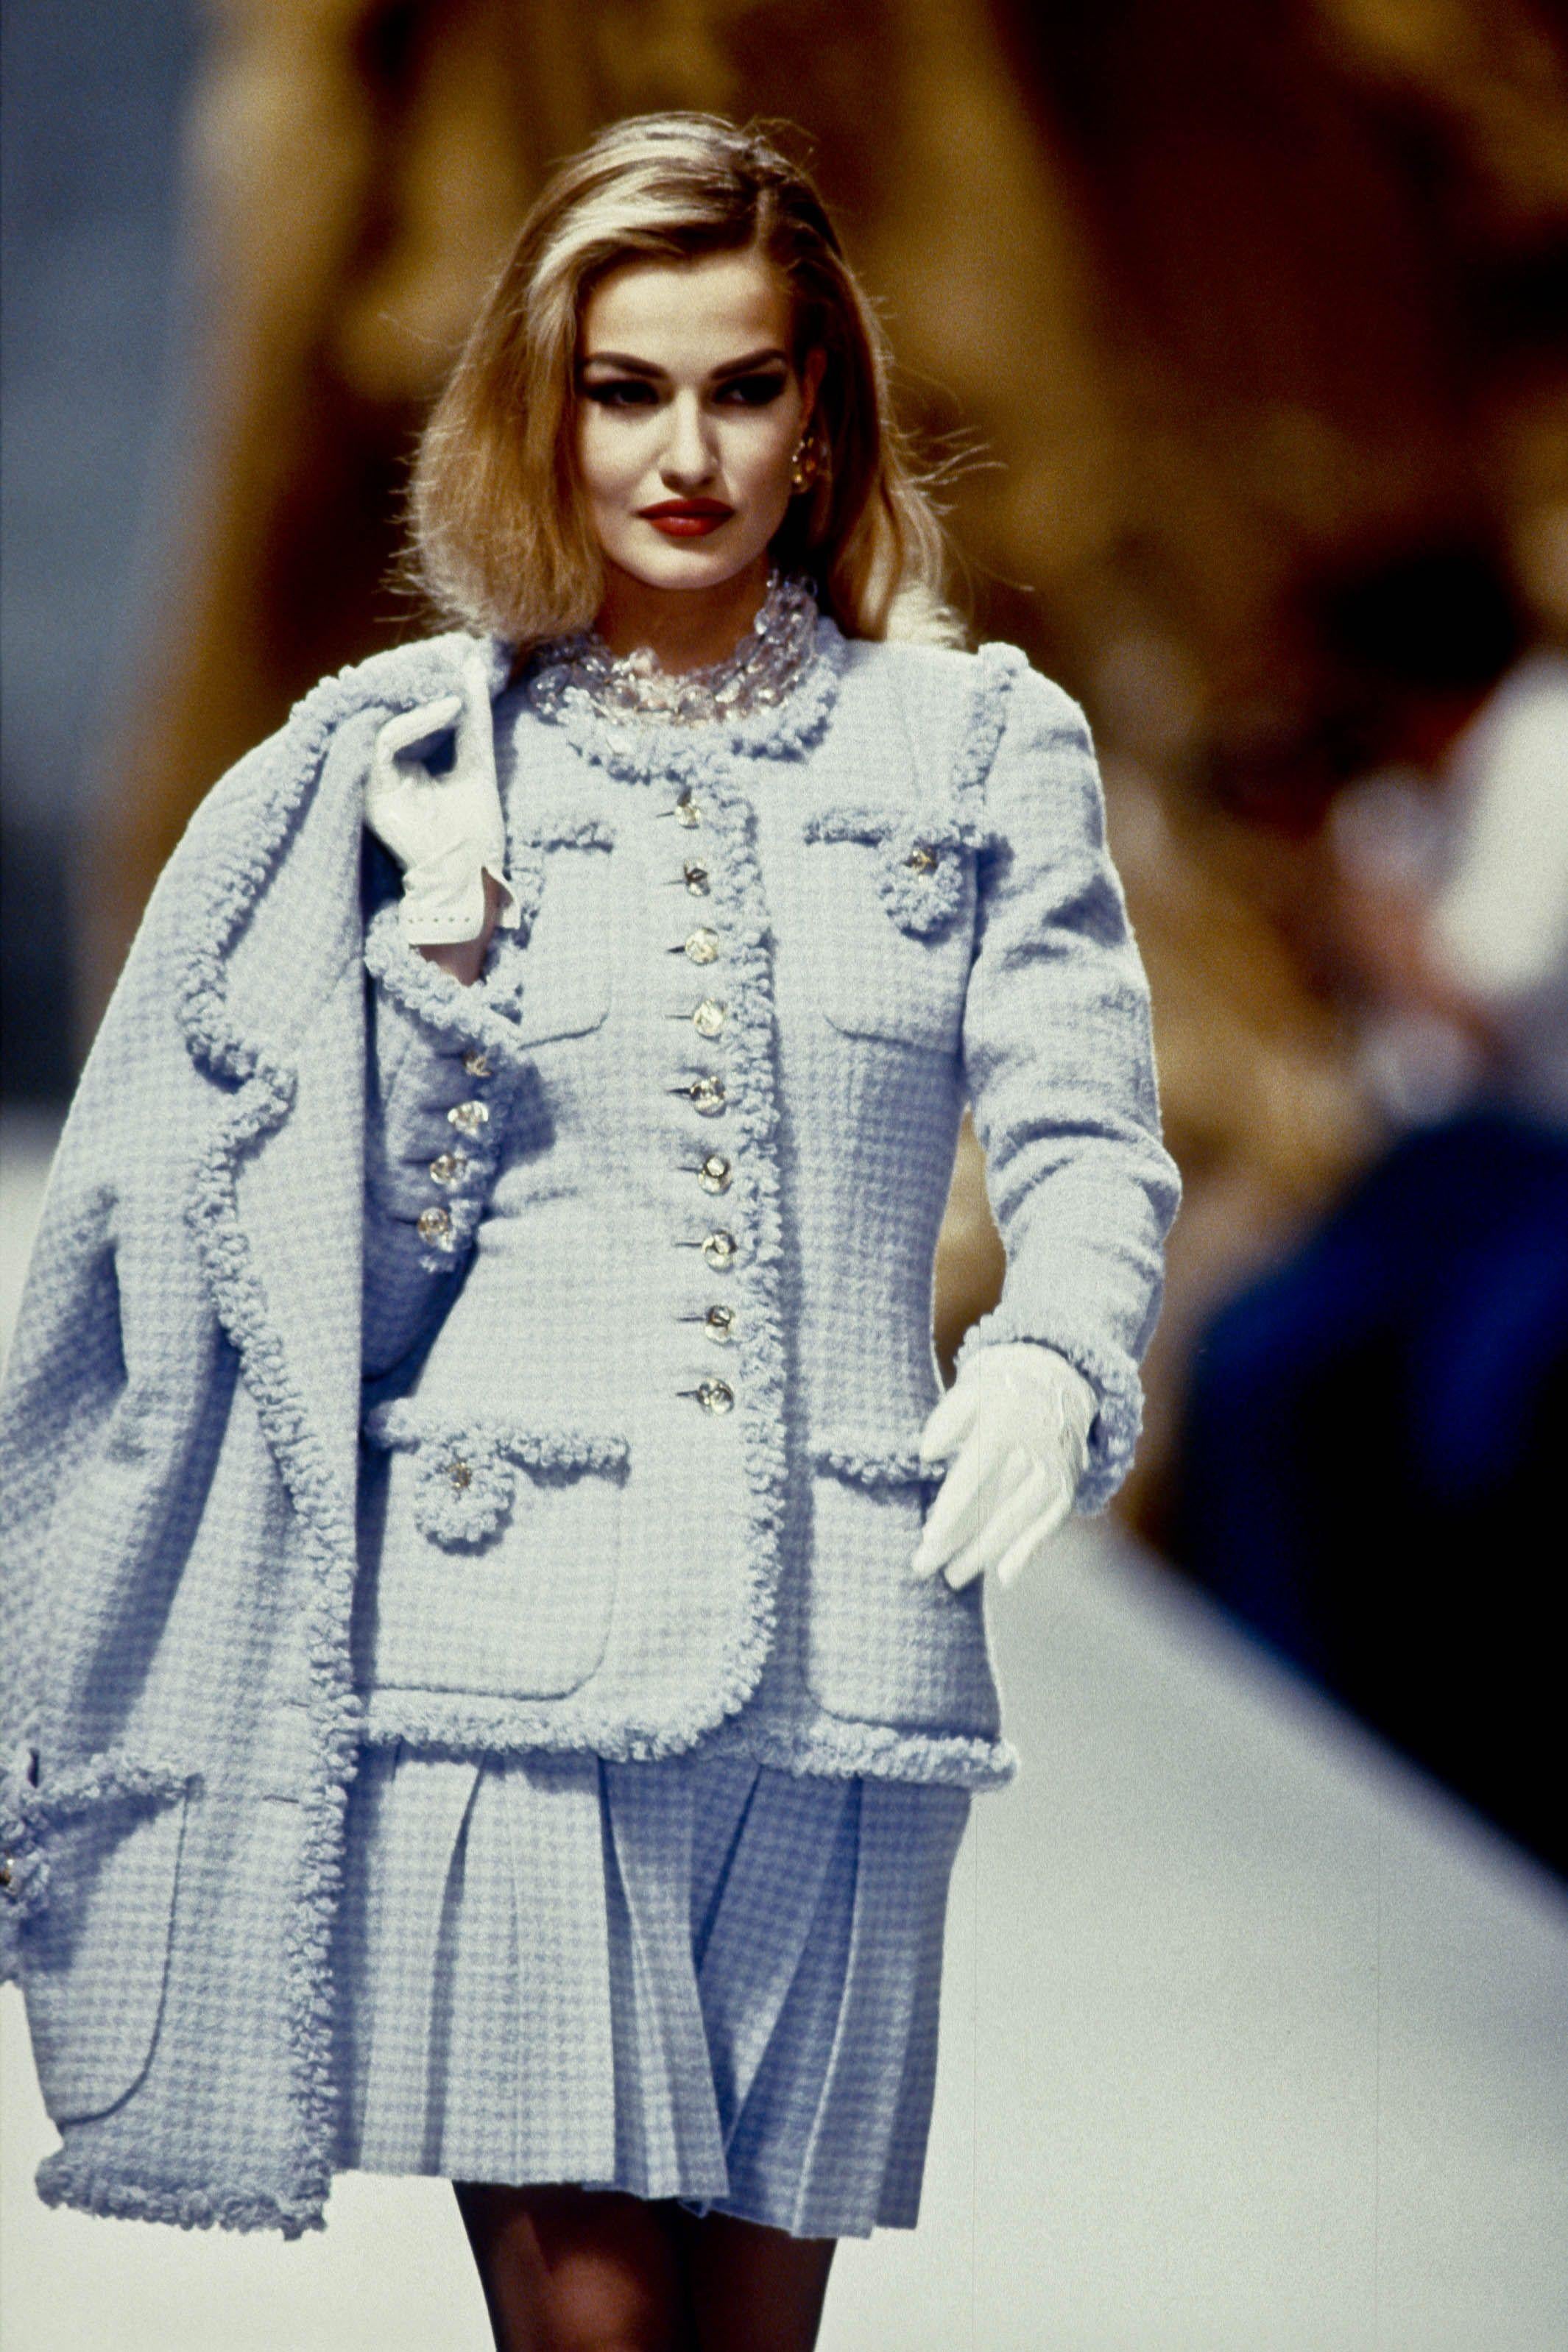 Chanel 1997 Vintage Baby Blue Tweed Jacket Museum Piece Seen on Princess Diana  For Sale 14